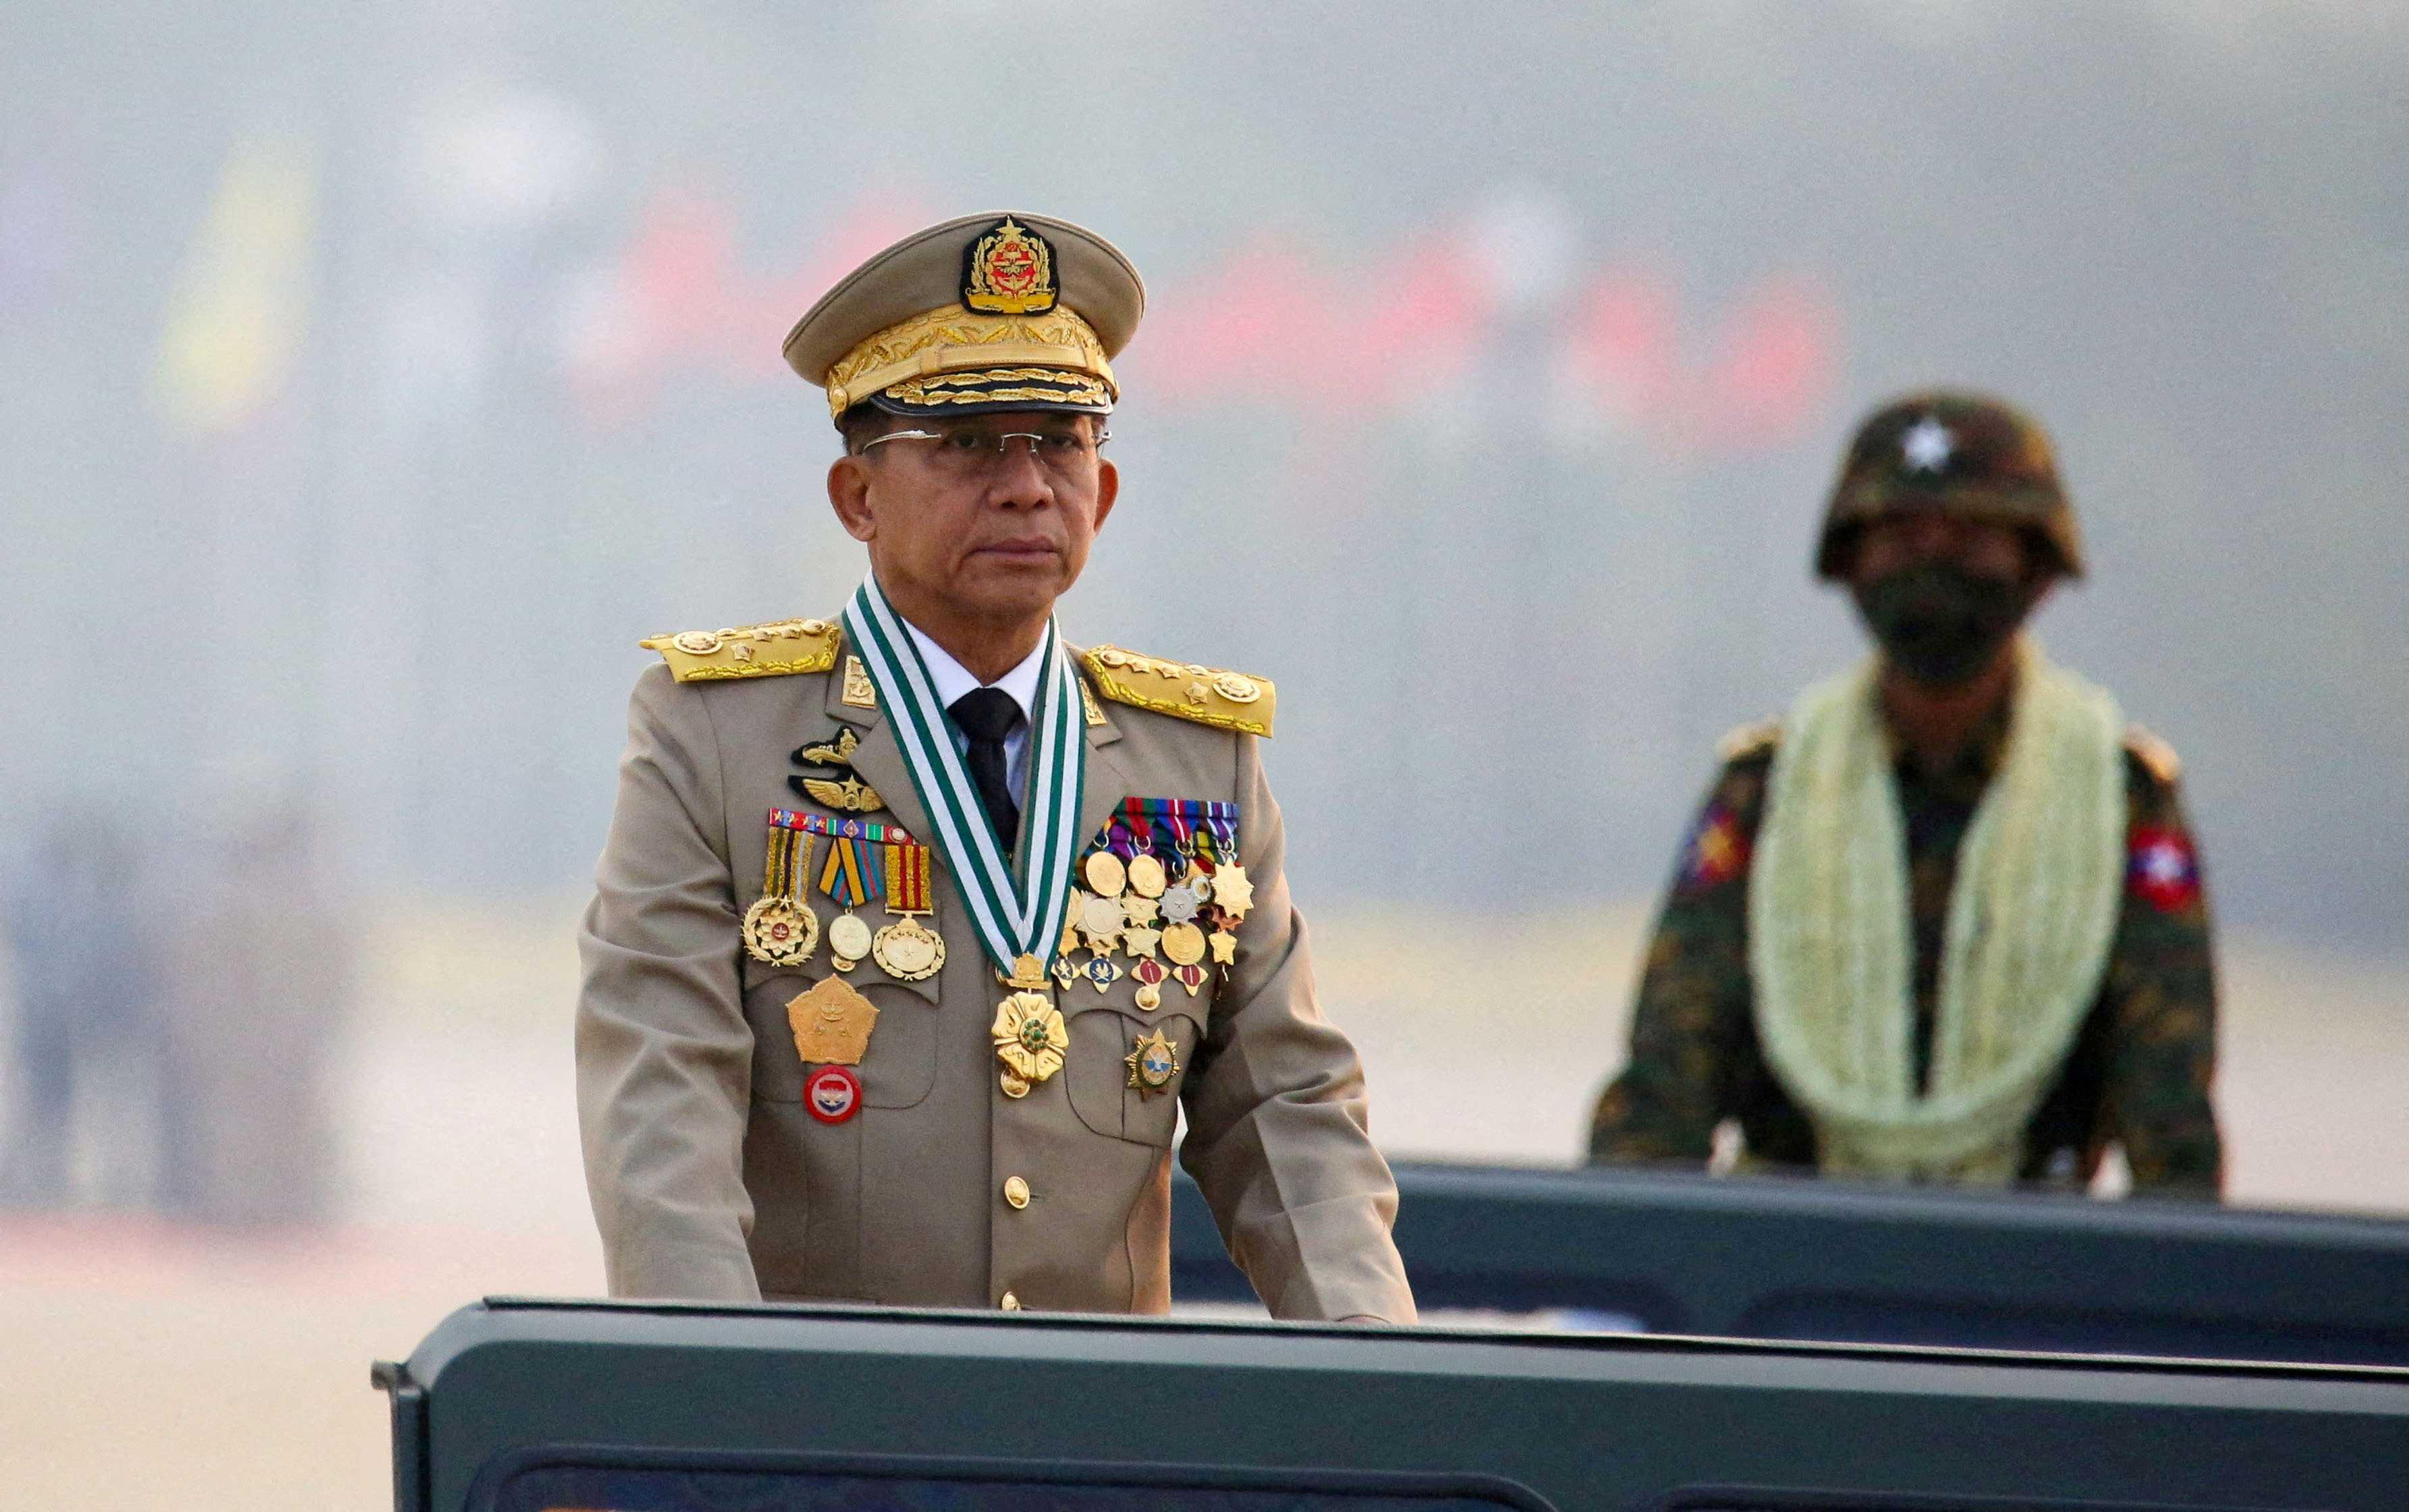 Myanmar's junta chief Senior General Min Aung Hlaing, who ousted the elected government in a coup on Feb 1, 2021, presides over an army parade on Armed Forces Day in Naypyitaw, Myanmar, March 27, 2021. Photo: Reuters